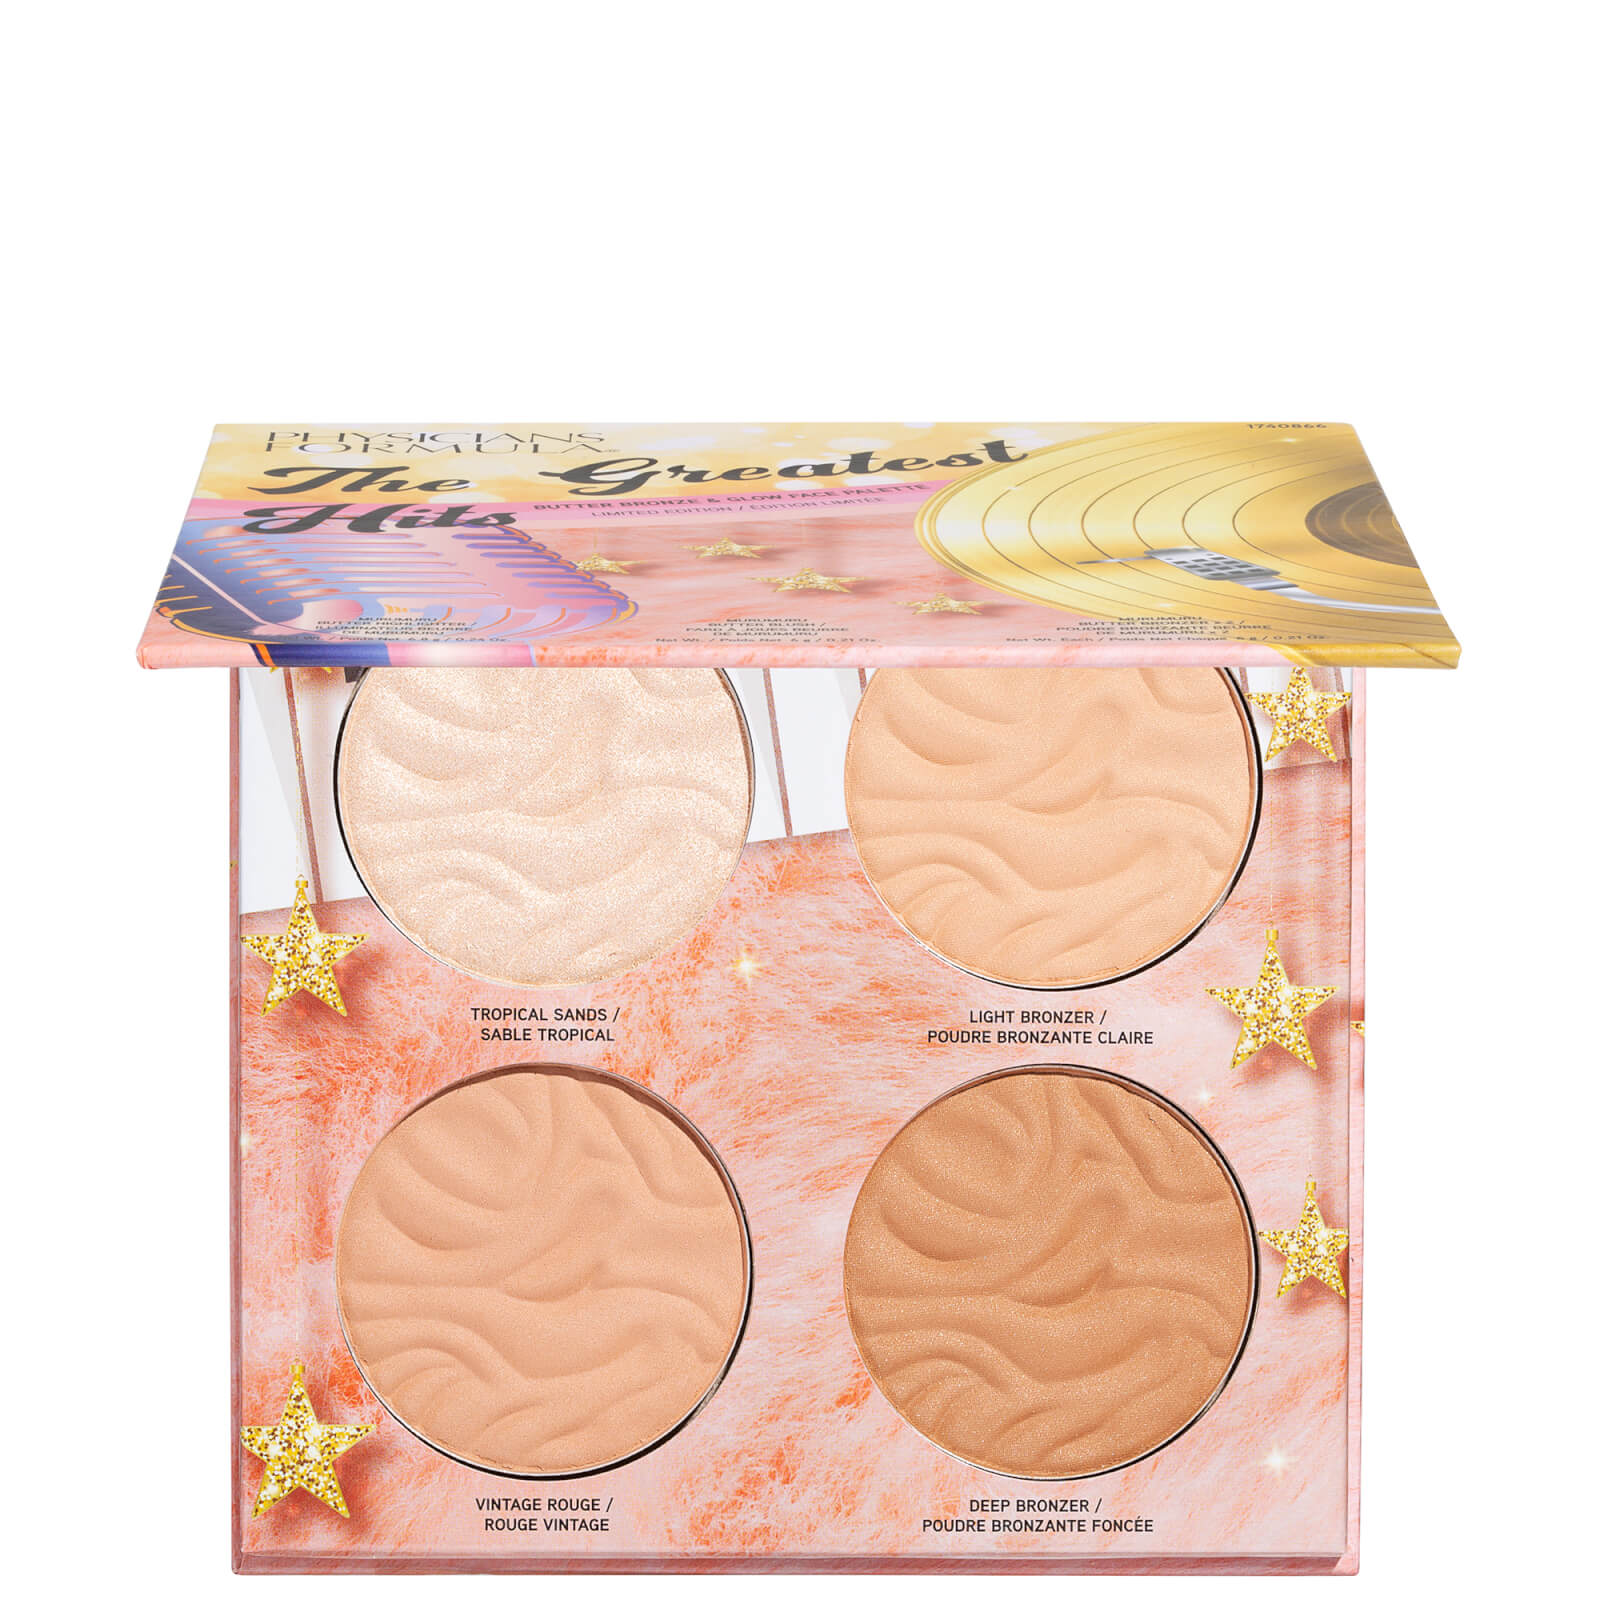 Image of Physicians Formula The Greatest Hits Bronze and Glow Palette